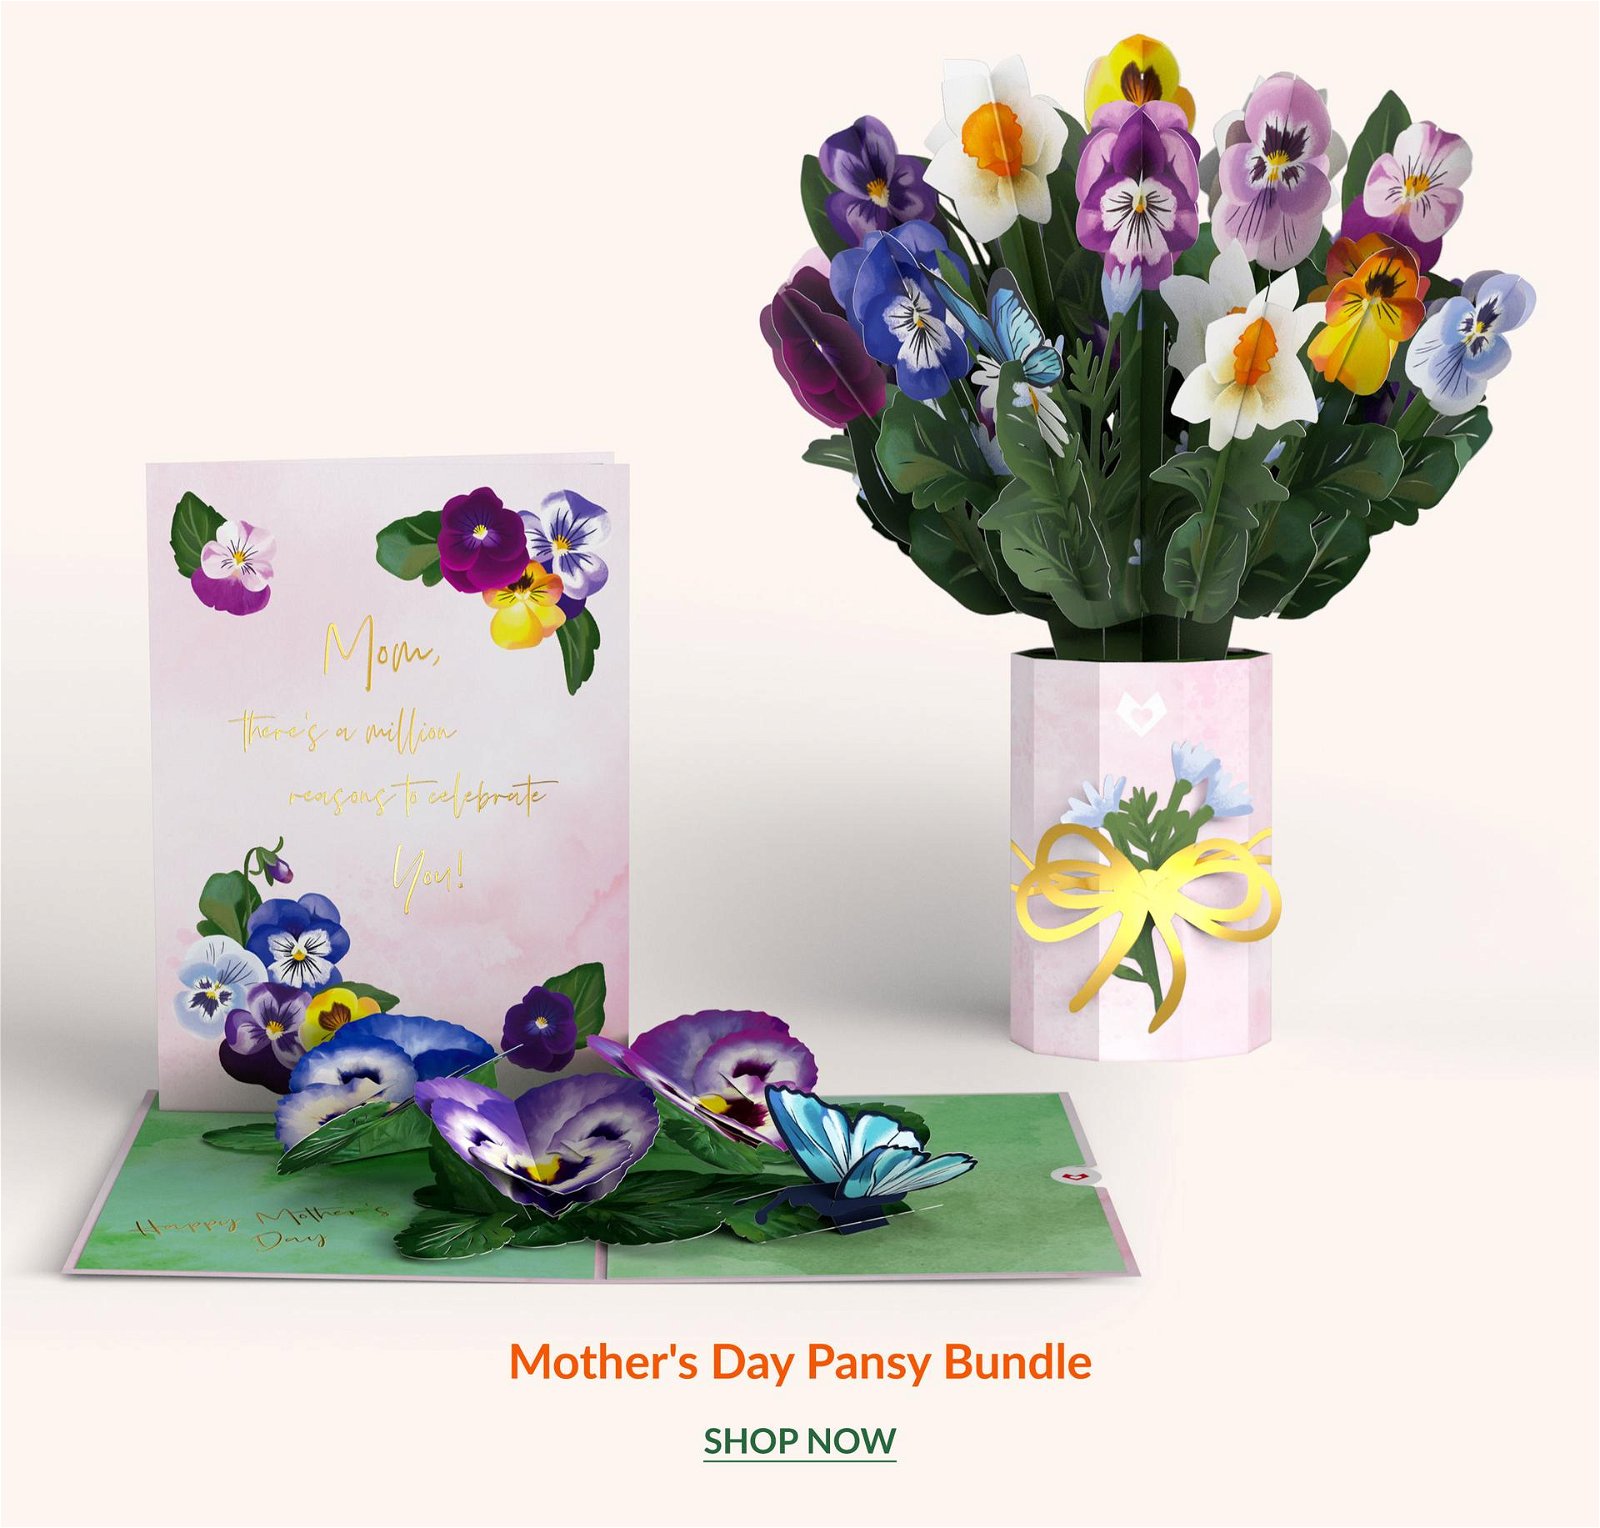 Mother’s Day Pansy Bundle | SHOP NOW